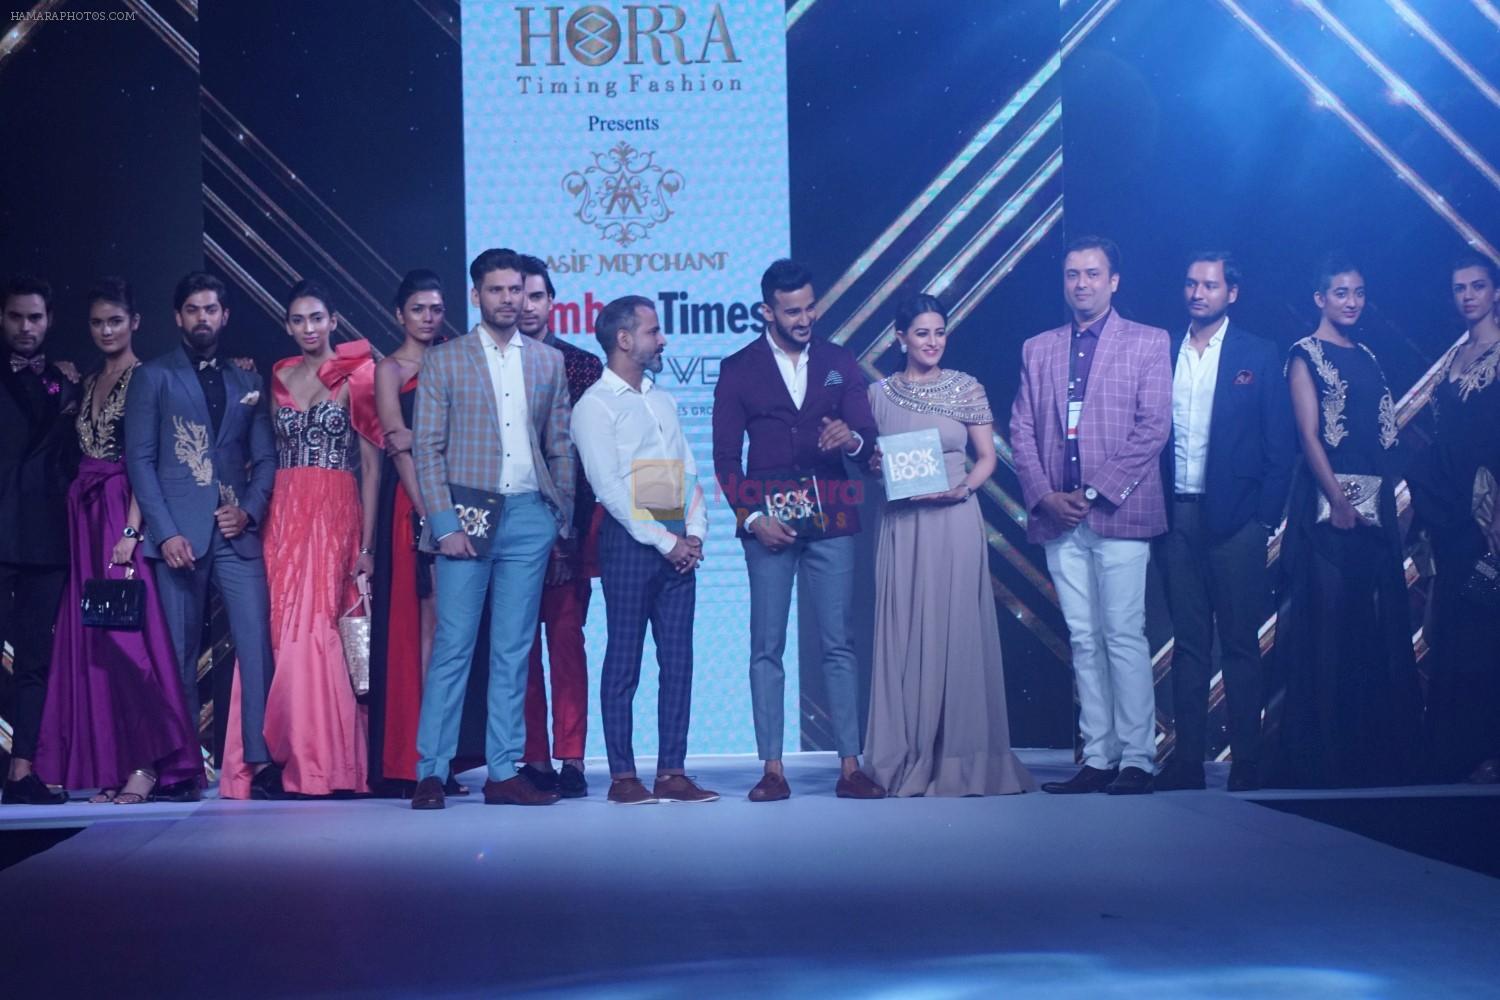 Anita Hassanandani & Rohit Reddy Showstopper For Designer Asif Merchant (Horra) At Bombay Times Fashion Week on 1st April 2018